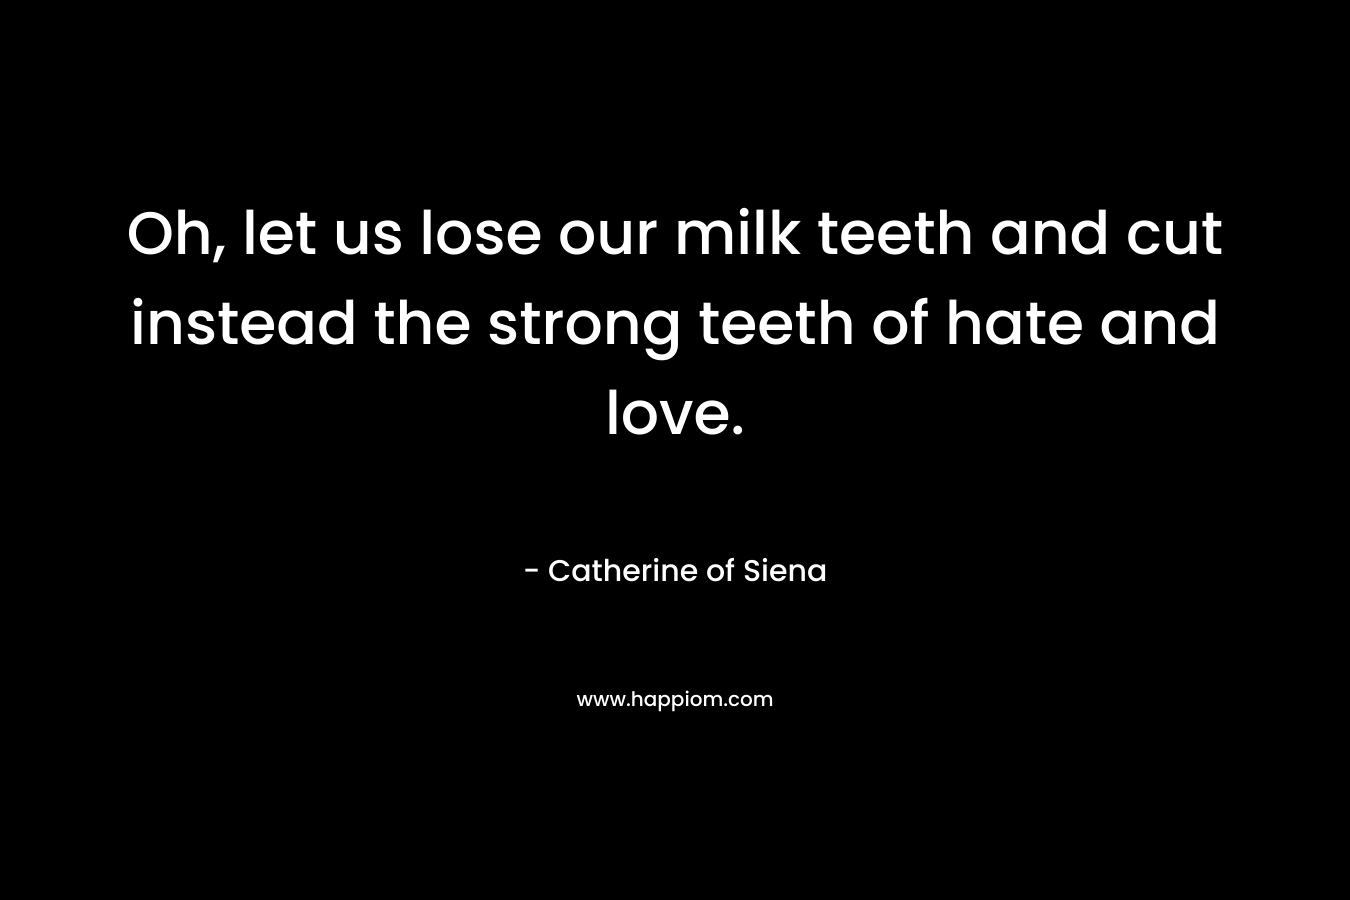 Oh, let us lose our milk teeth and cut instead the strong teeth of hate and love.